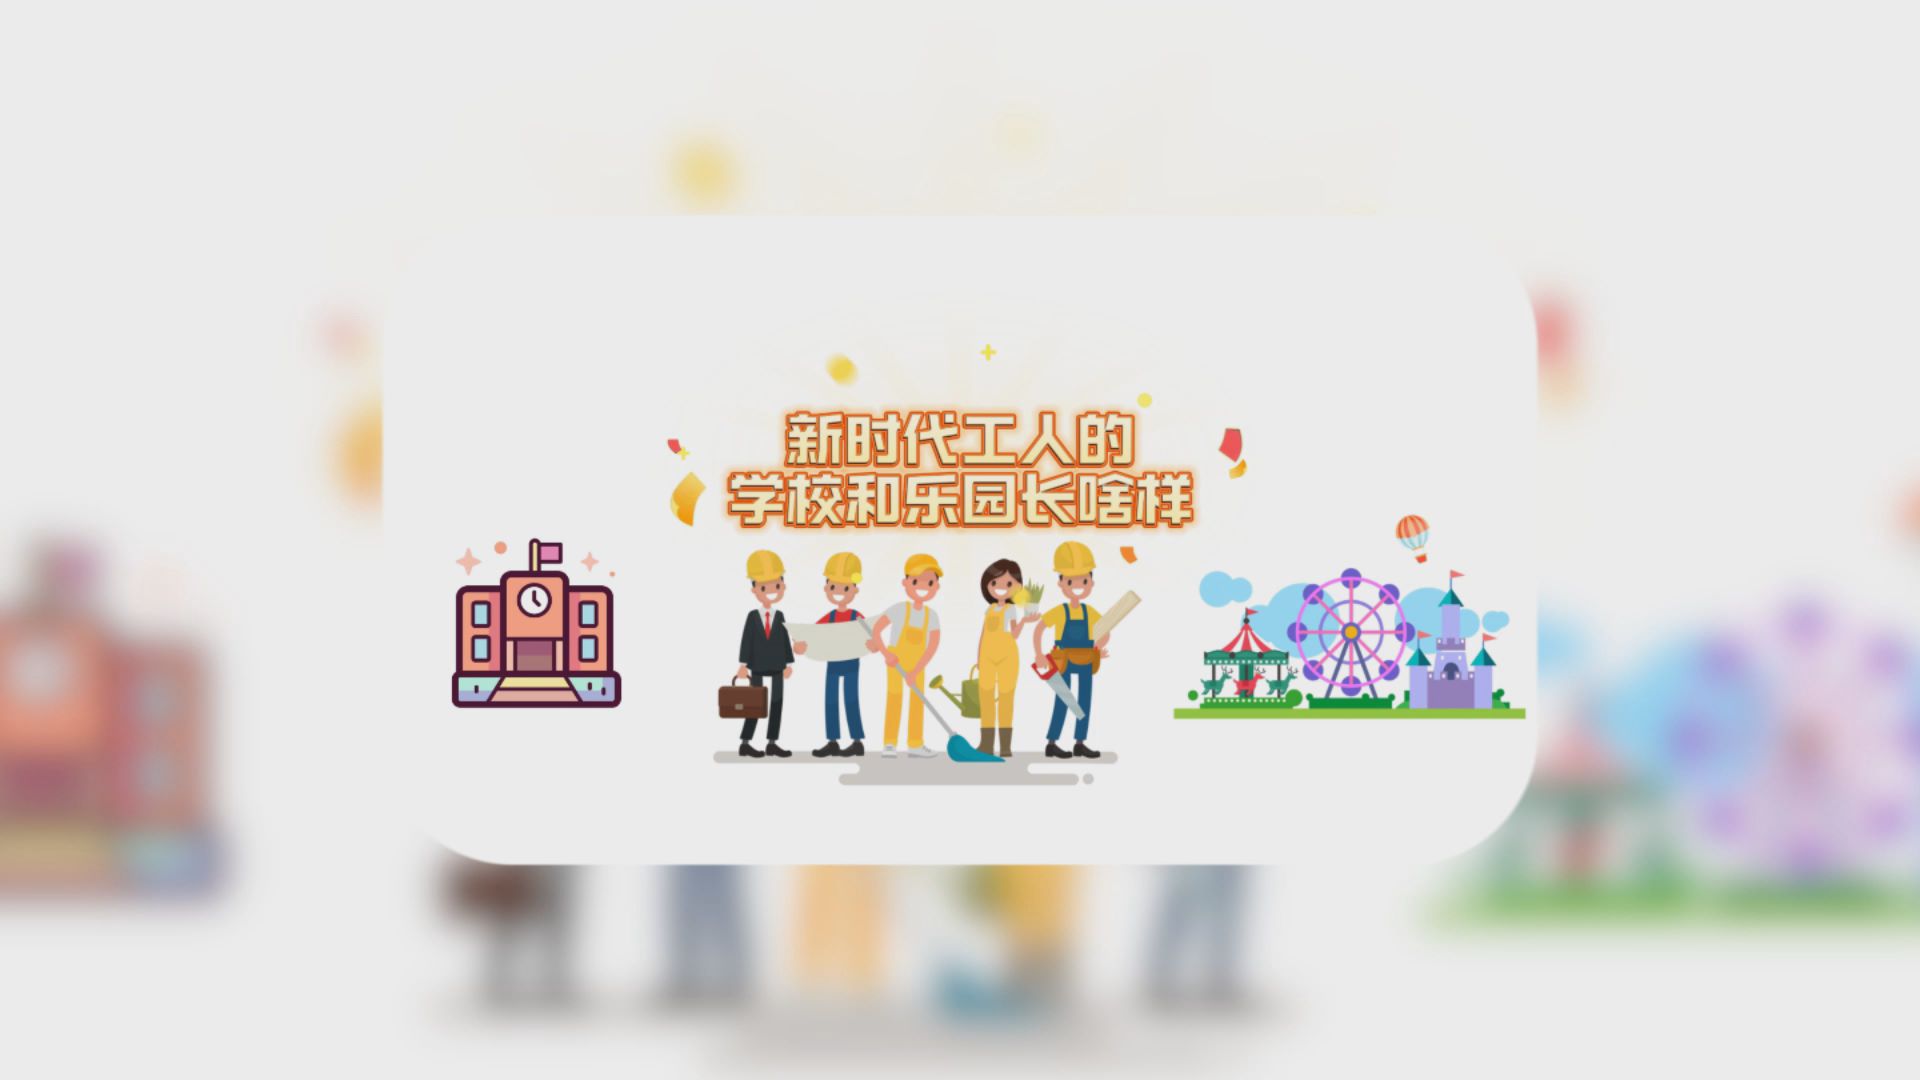  Innovation case of key work of trade union | New action! Linyi Municipal Federation of Trade Unions creates a working brand of "Gonghui+" to help the great development of staff culture